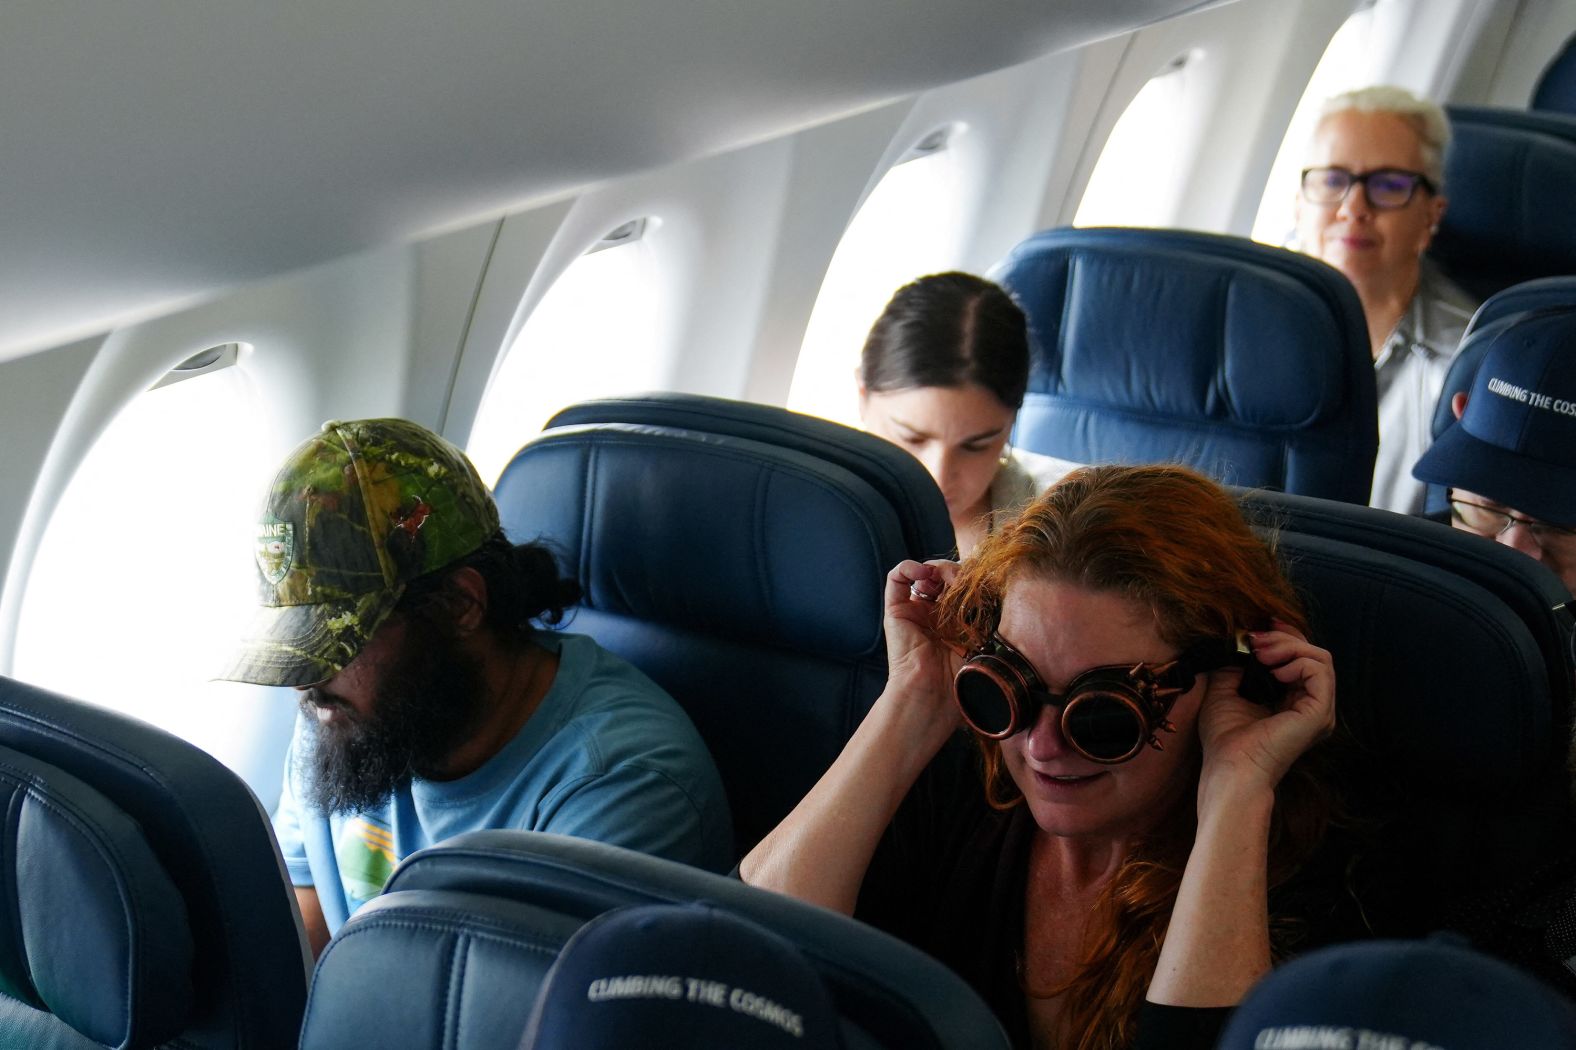 Passengers sit on a special <a href="https://www.cnn.com/world/live-news/total-solar-eclipse-04-08-24-scn/h_0805aad2fa0453937598c63c98371f2f" target="_blank">path-of-totality flight</a> offered by Delta Air Lines on Monday.